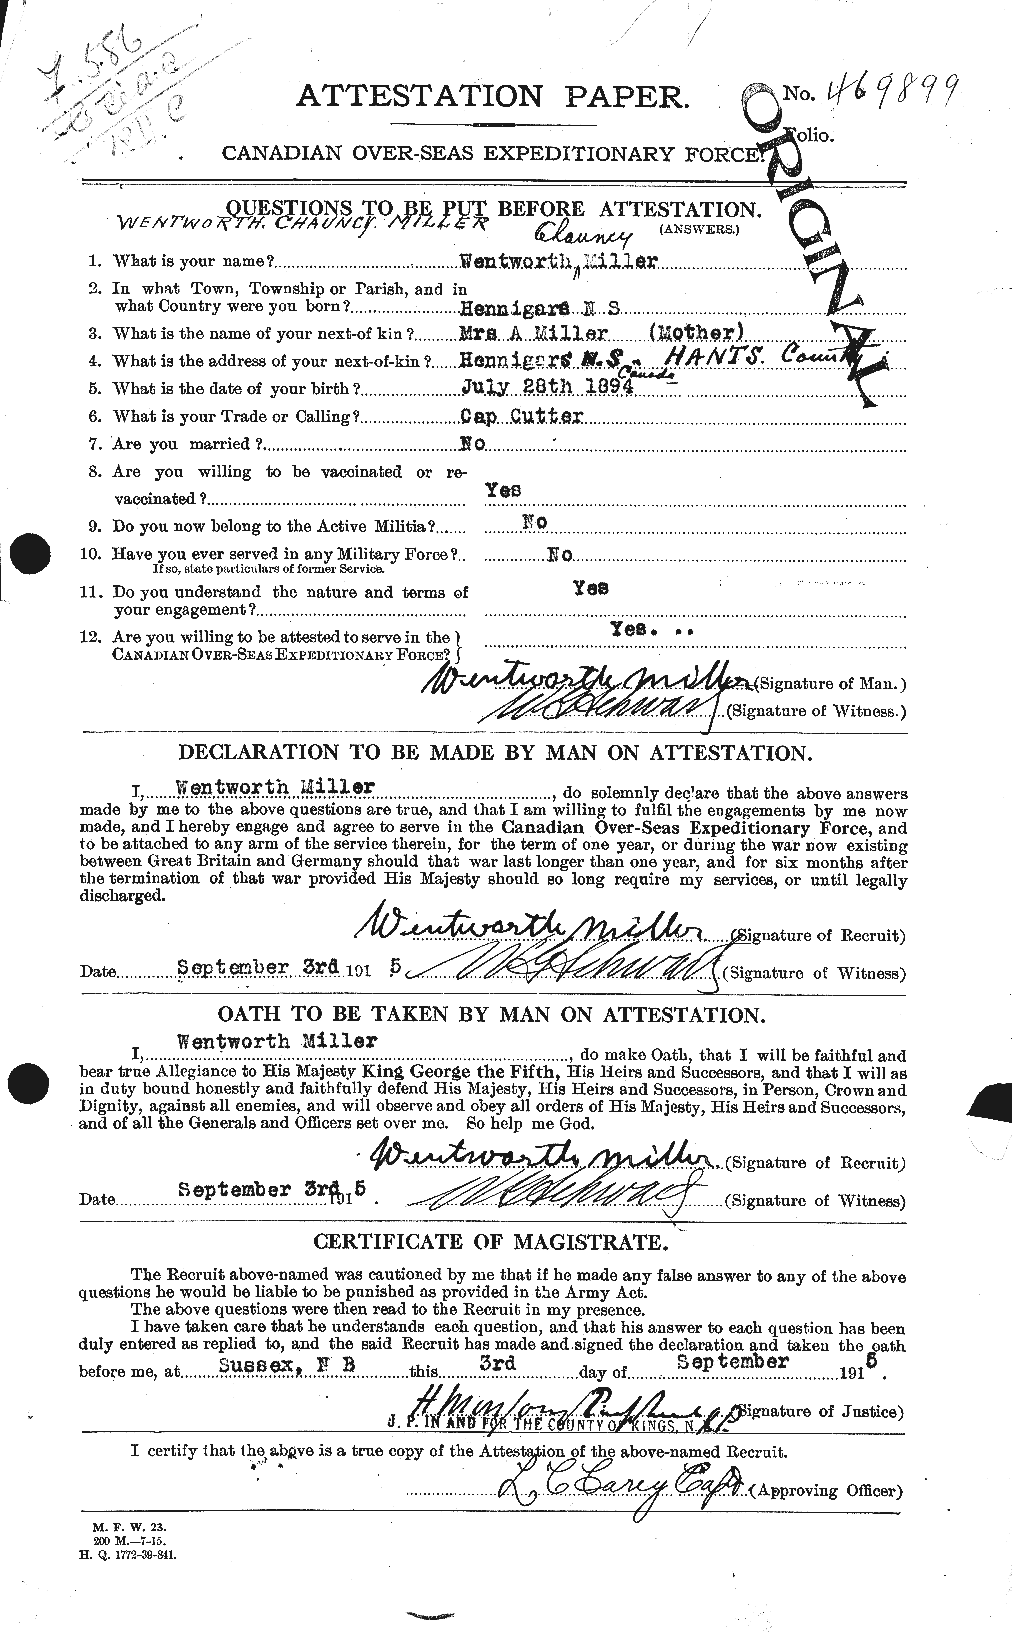 Personnel Records of the First World War - CEF 501732a